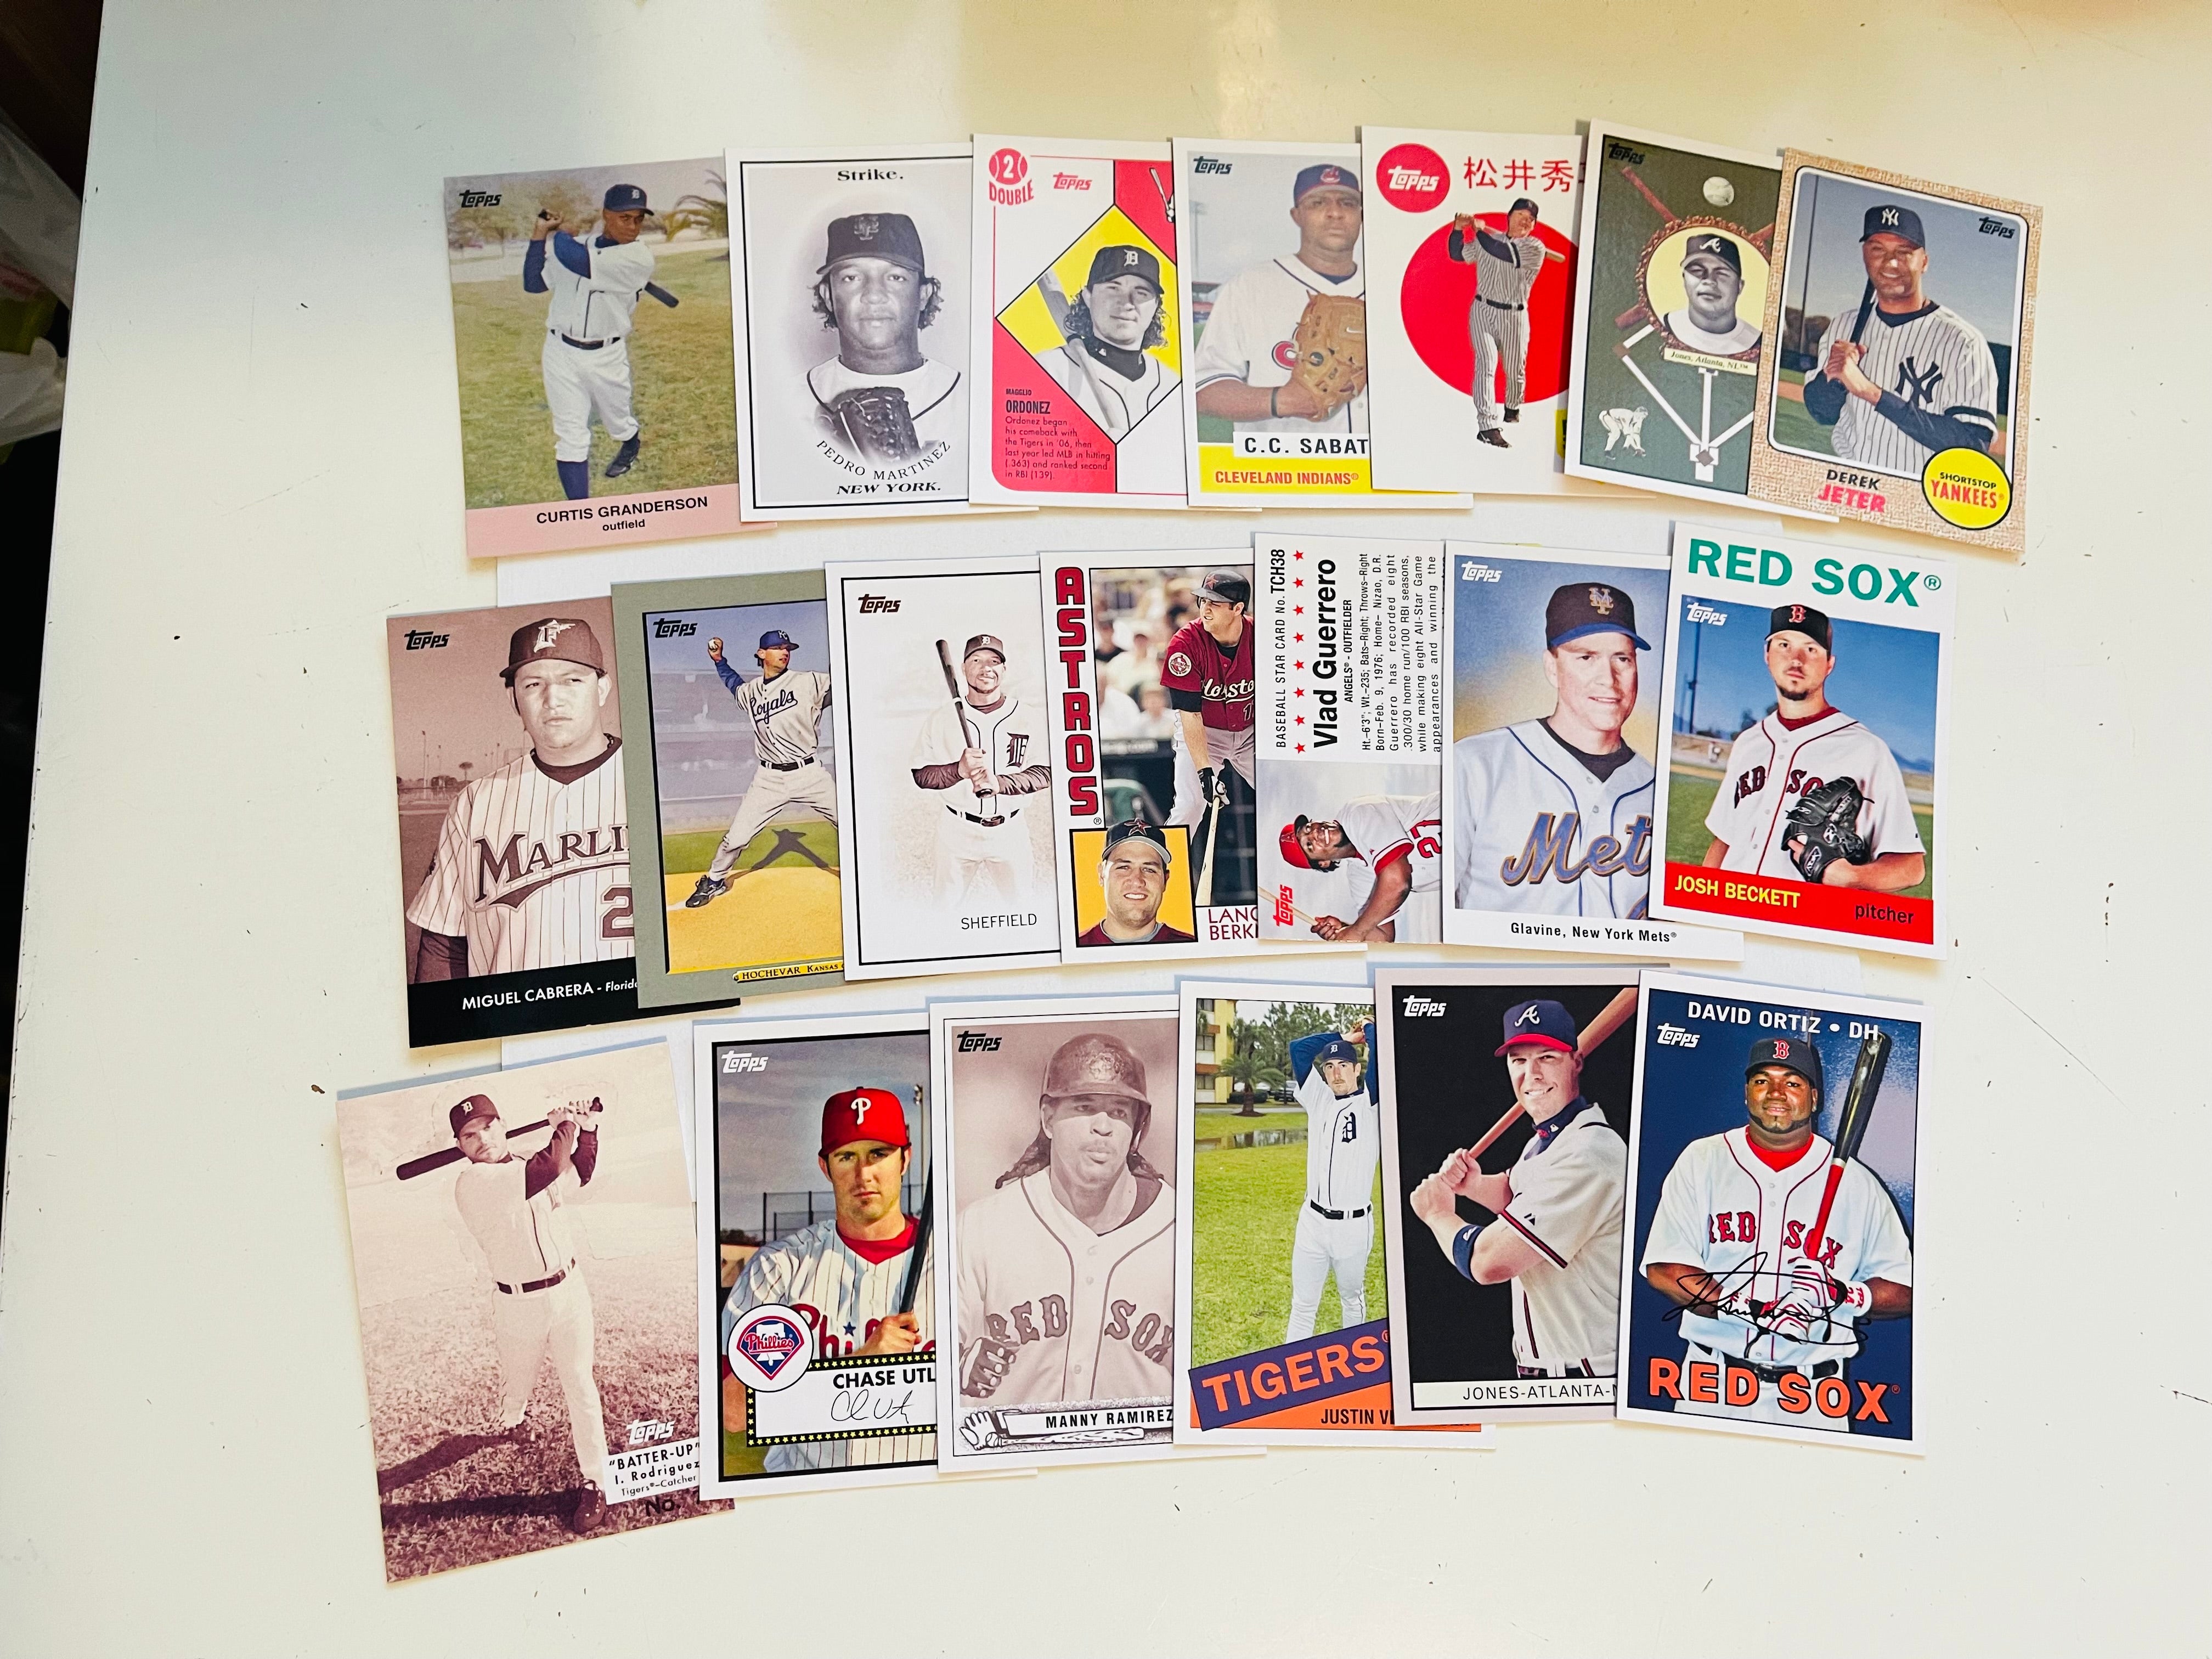 2008 Topps baseball history limited issued cards set